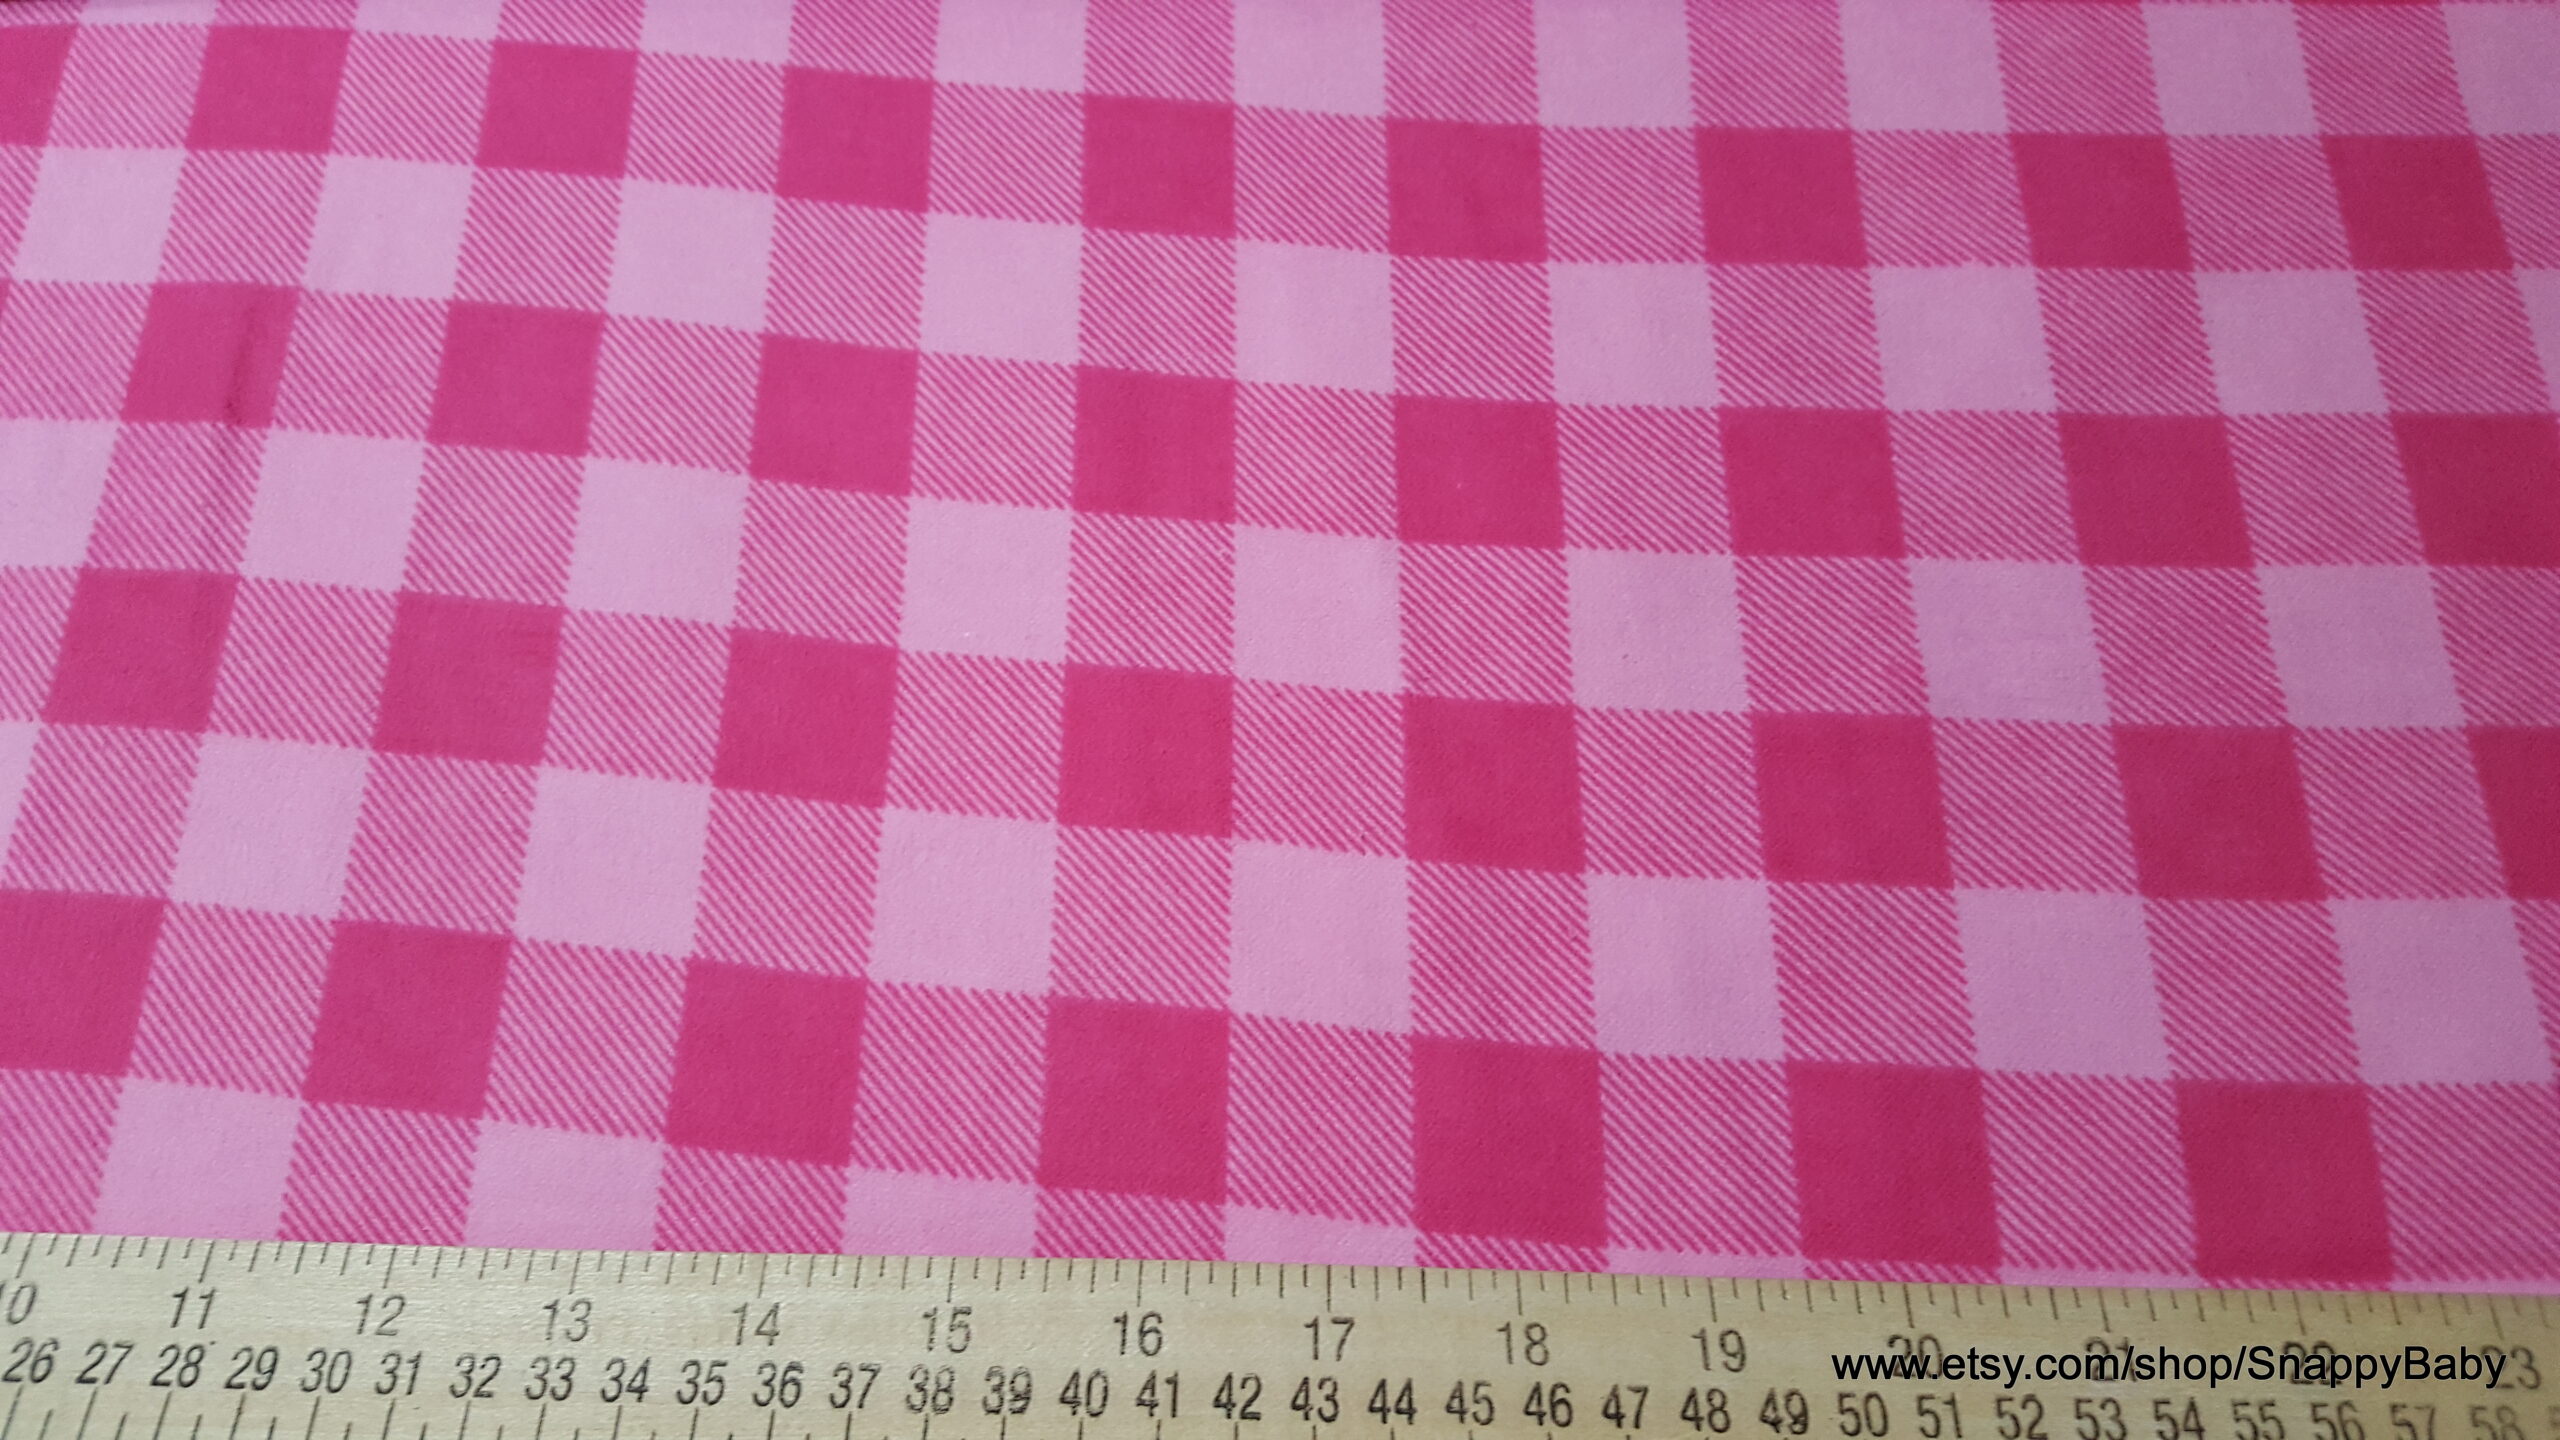 Flannel Fabric - Pink Buffalo Check - By the yard - 100% Cotton Flannel -  Merchlet